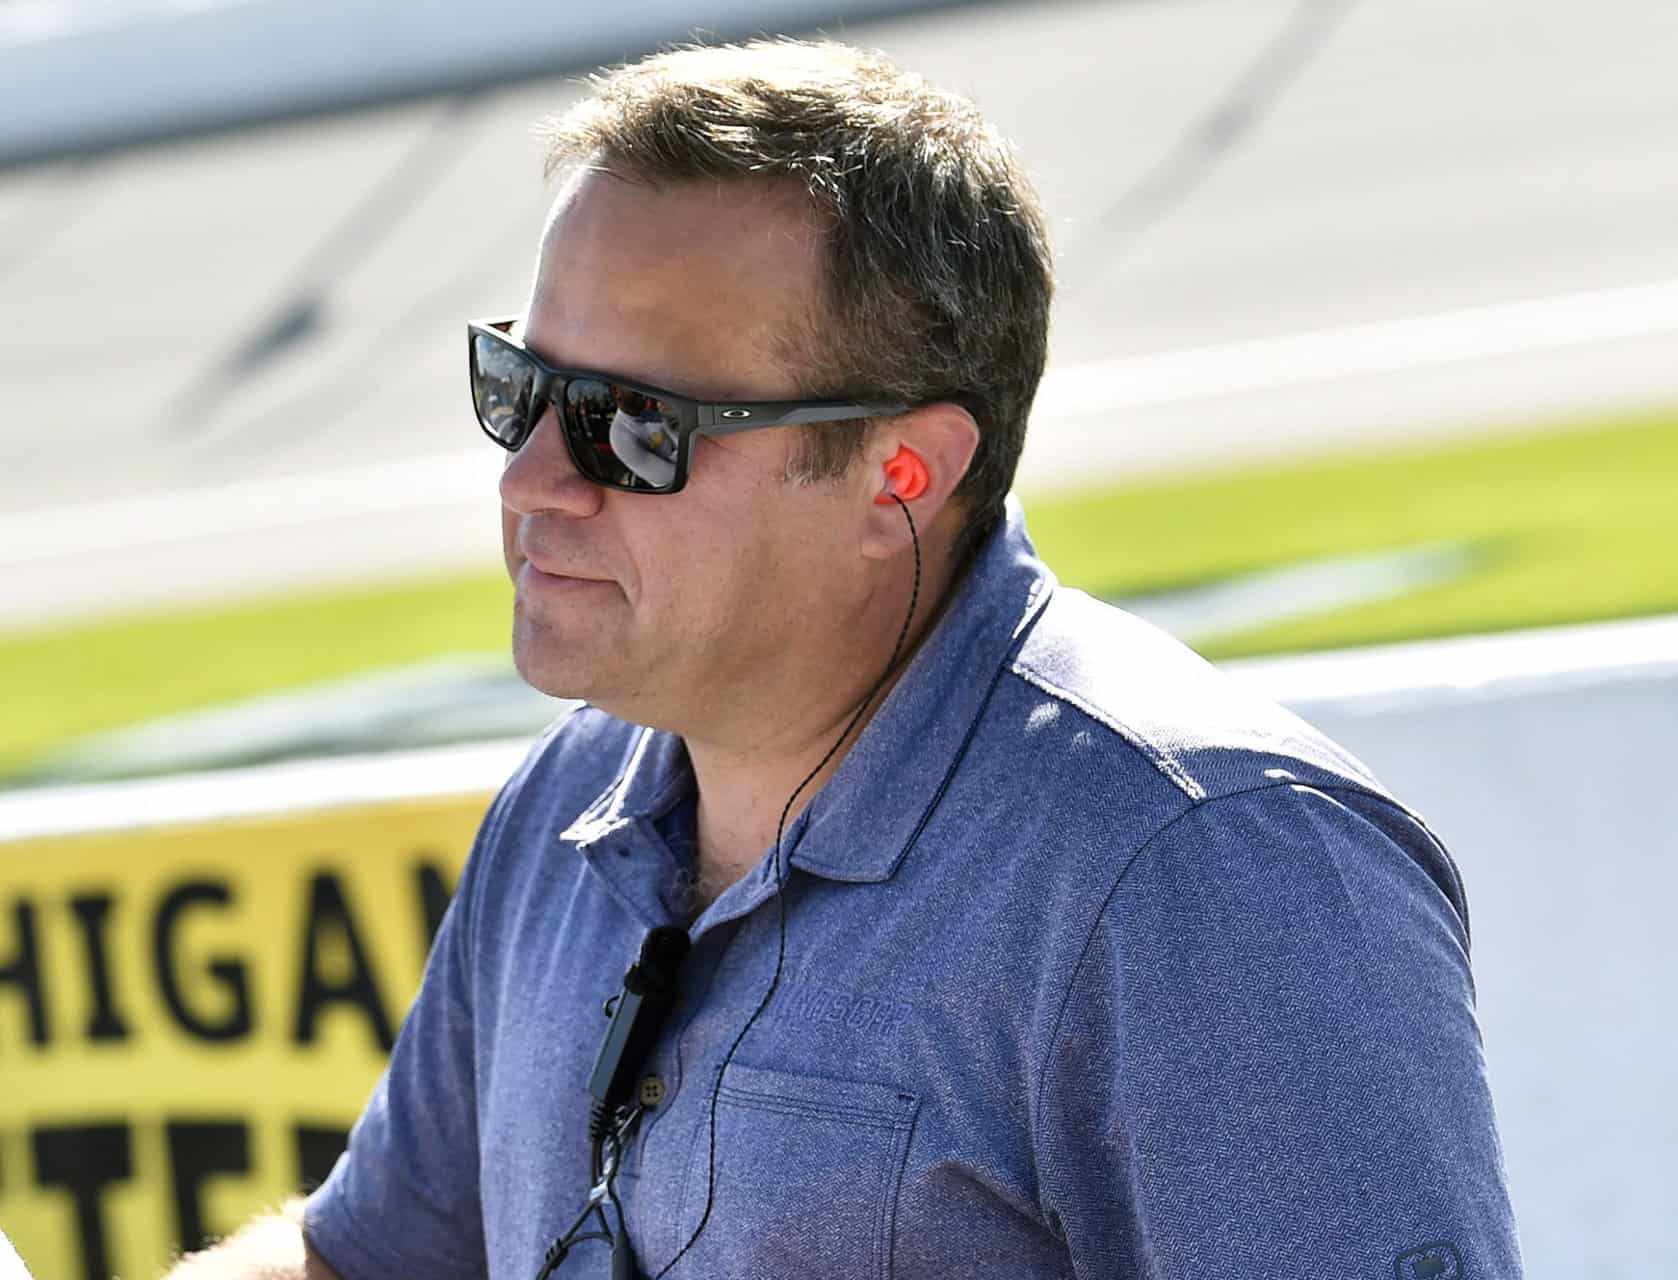 Jay Fabian, NASCAR’s Cup Series Managing Director since 2019, faces two felony counts and one misdemeanor count for animal cruelty.